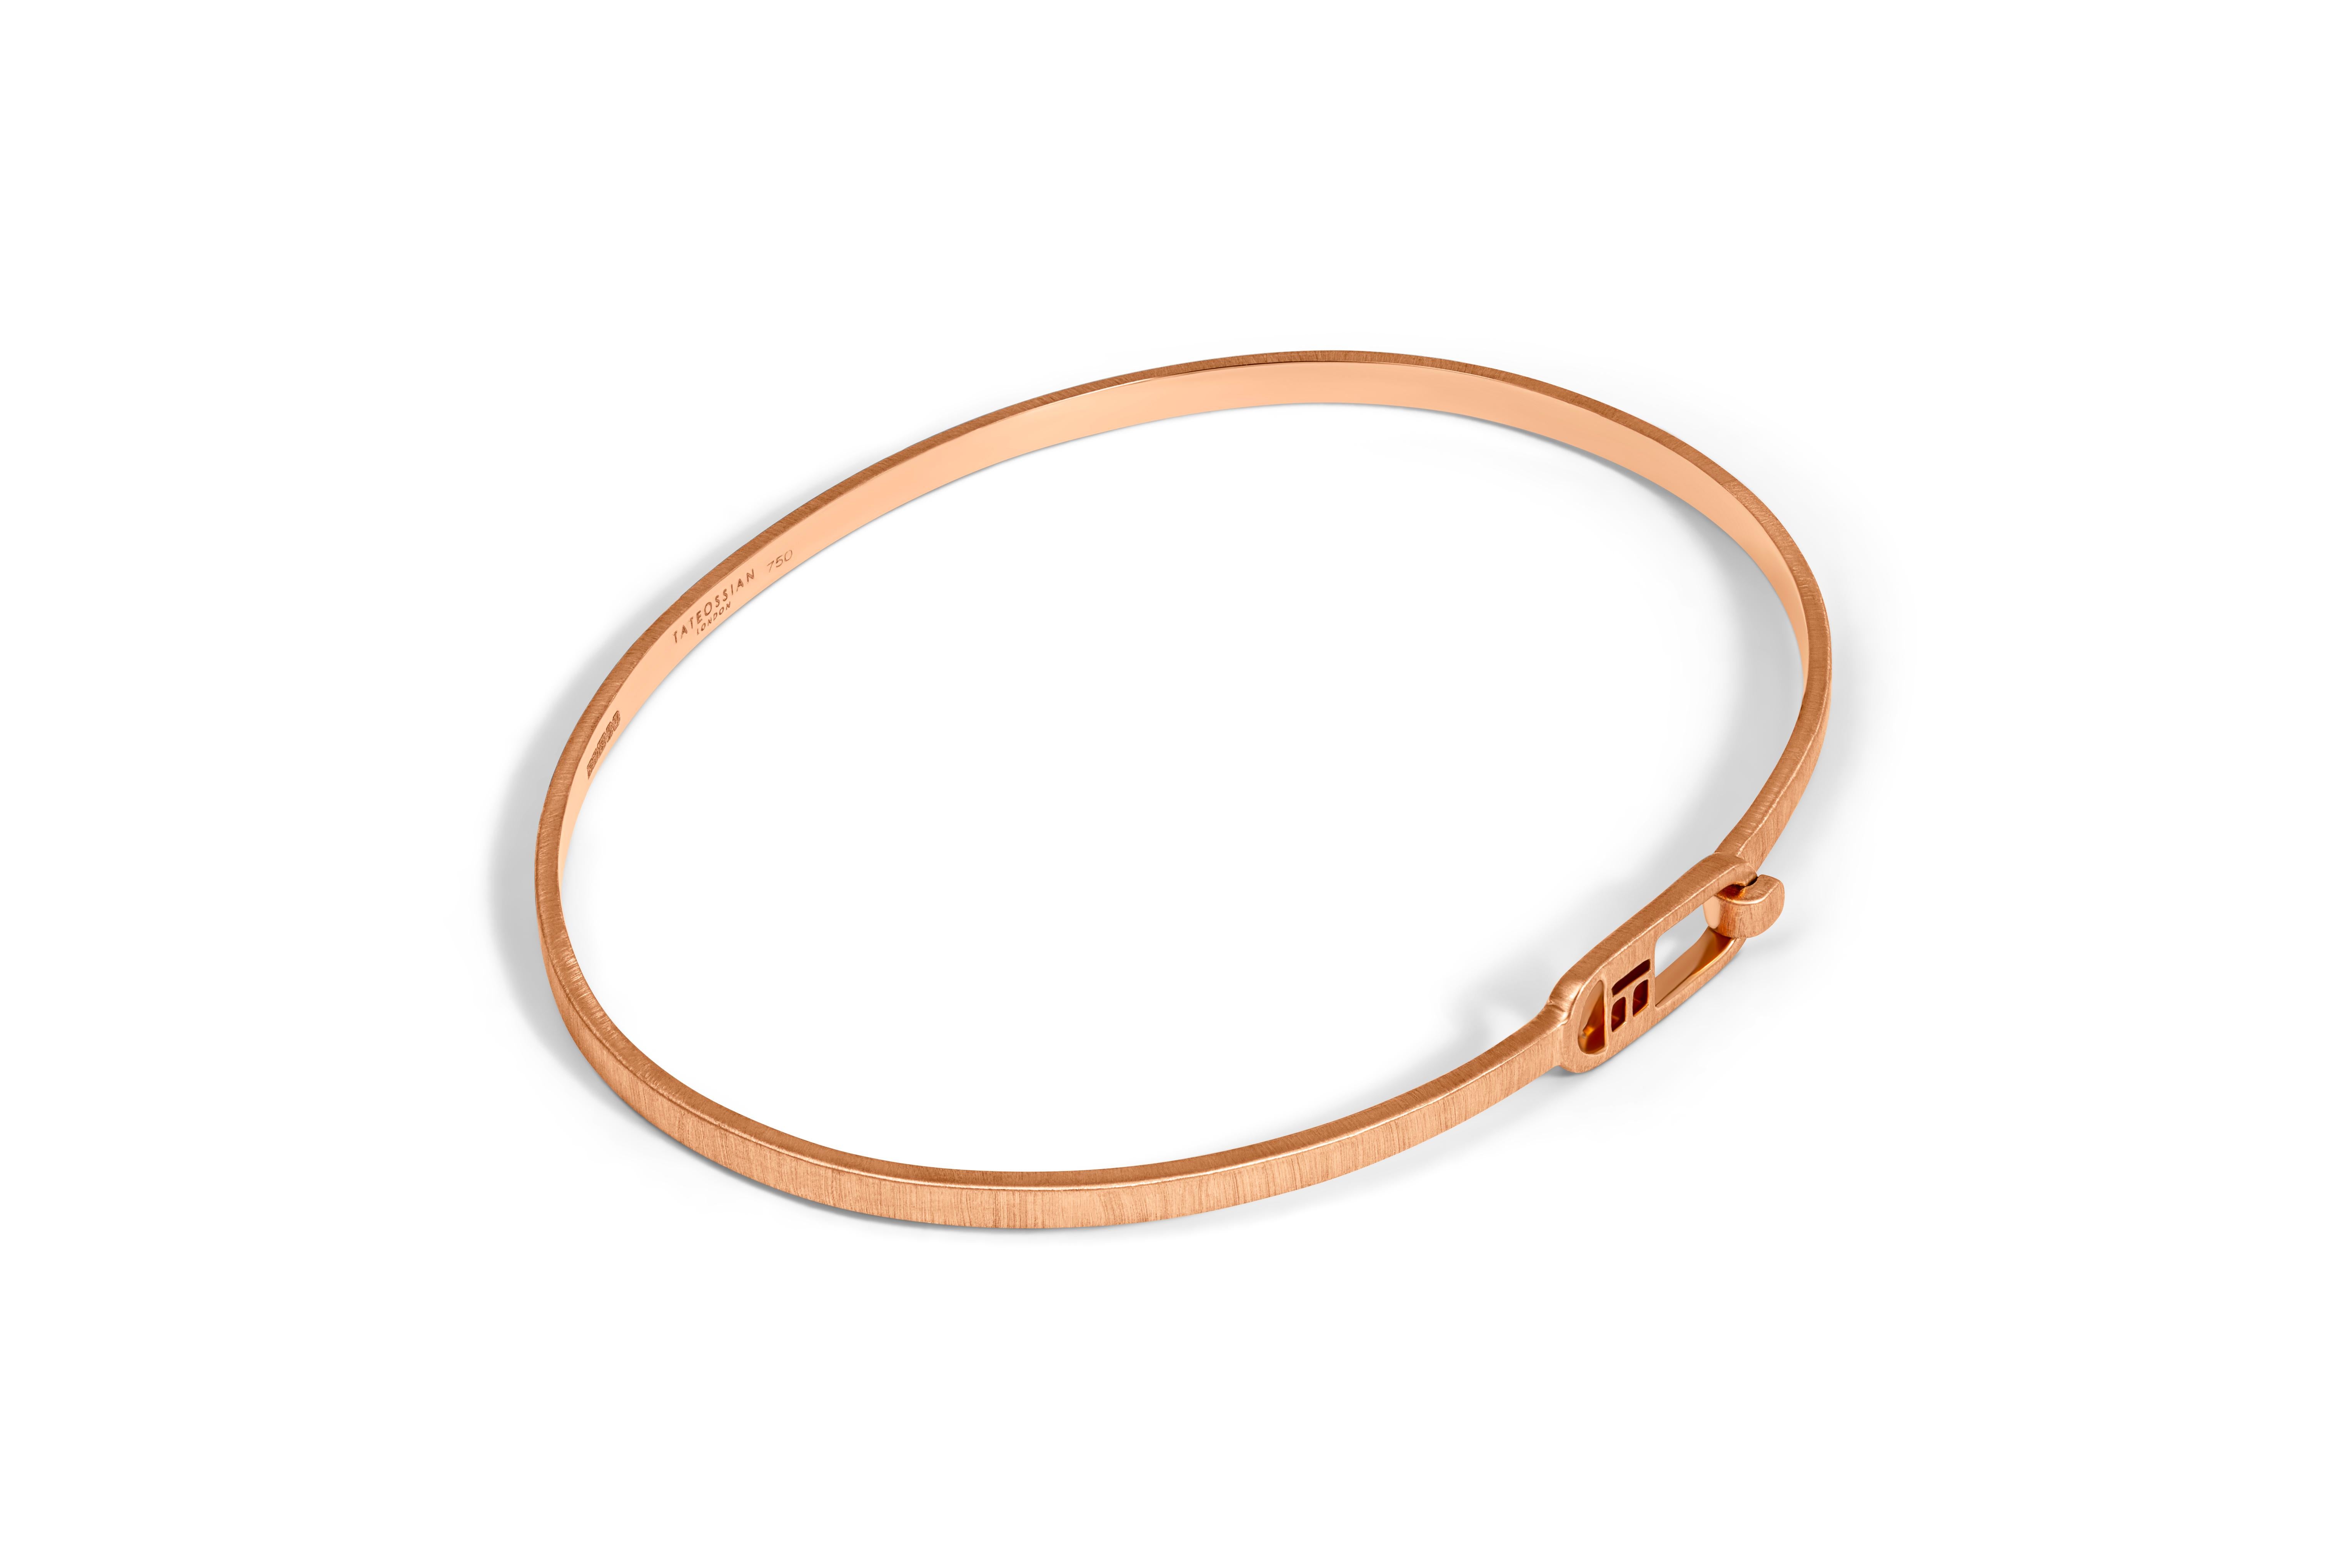 T-Bangle in Brushed 18K Rose Gold, Size XS For Sale 1